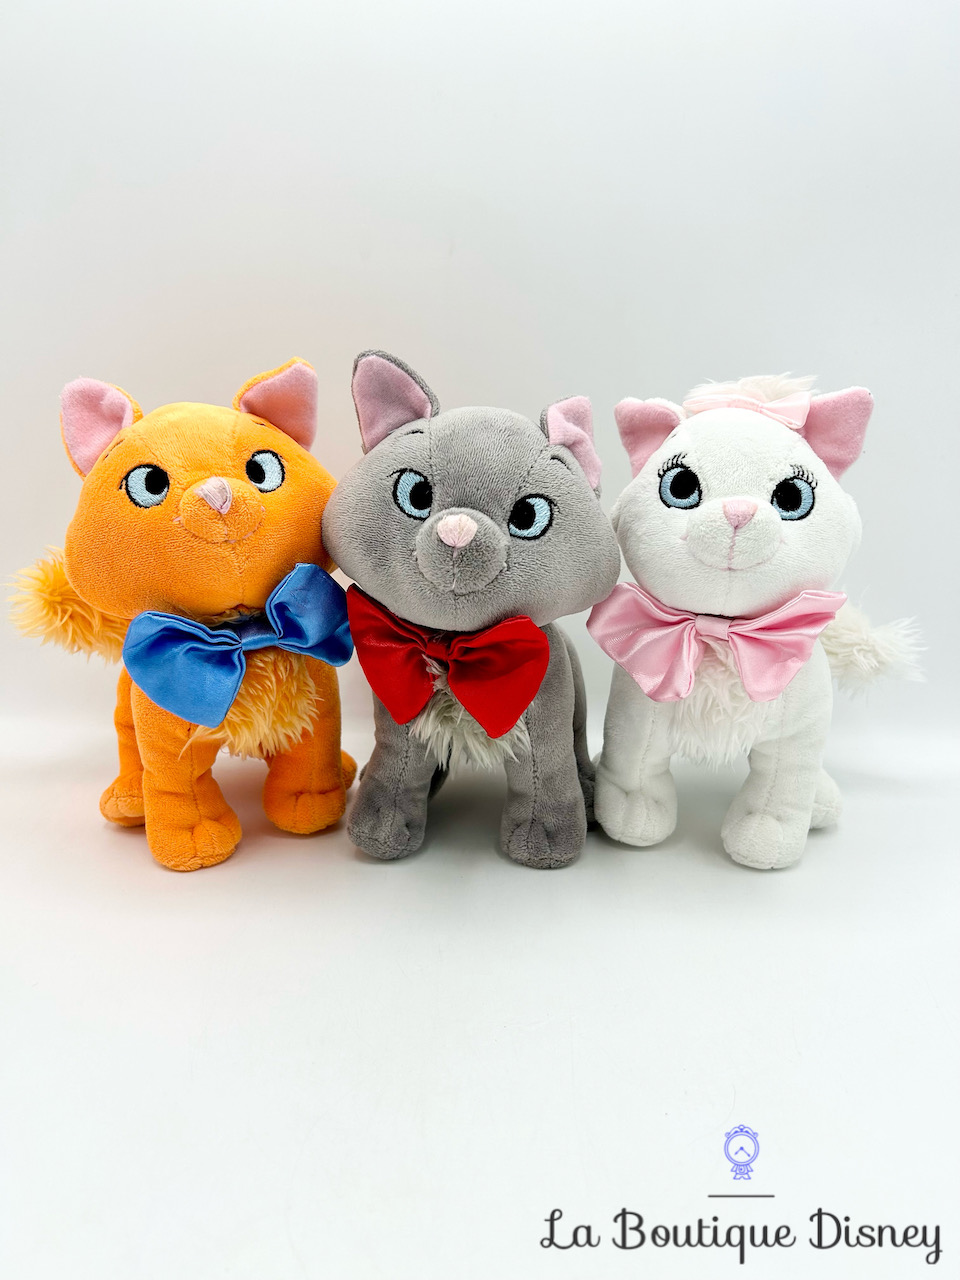 Peluches Les Aristochats Marie Berlioz Toulouse Disney Store chats 18 cm